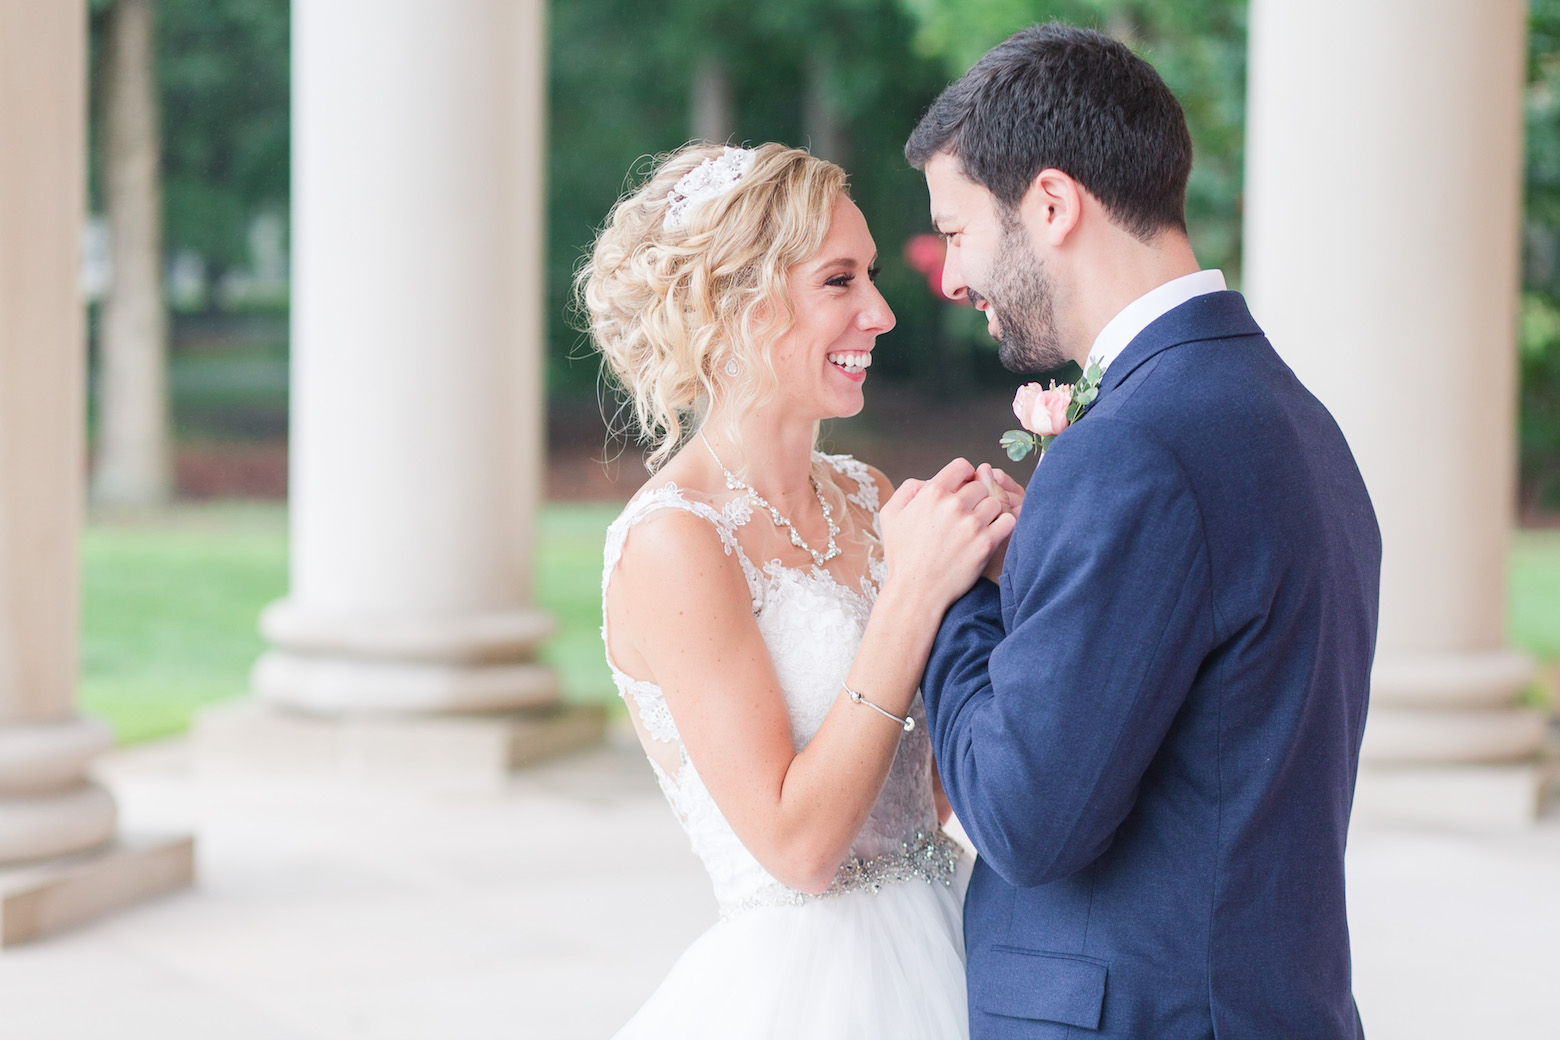 5 Ways to Reduce Stress on Your Wedding Day